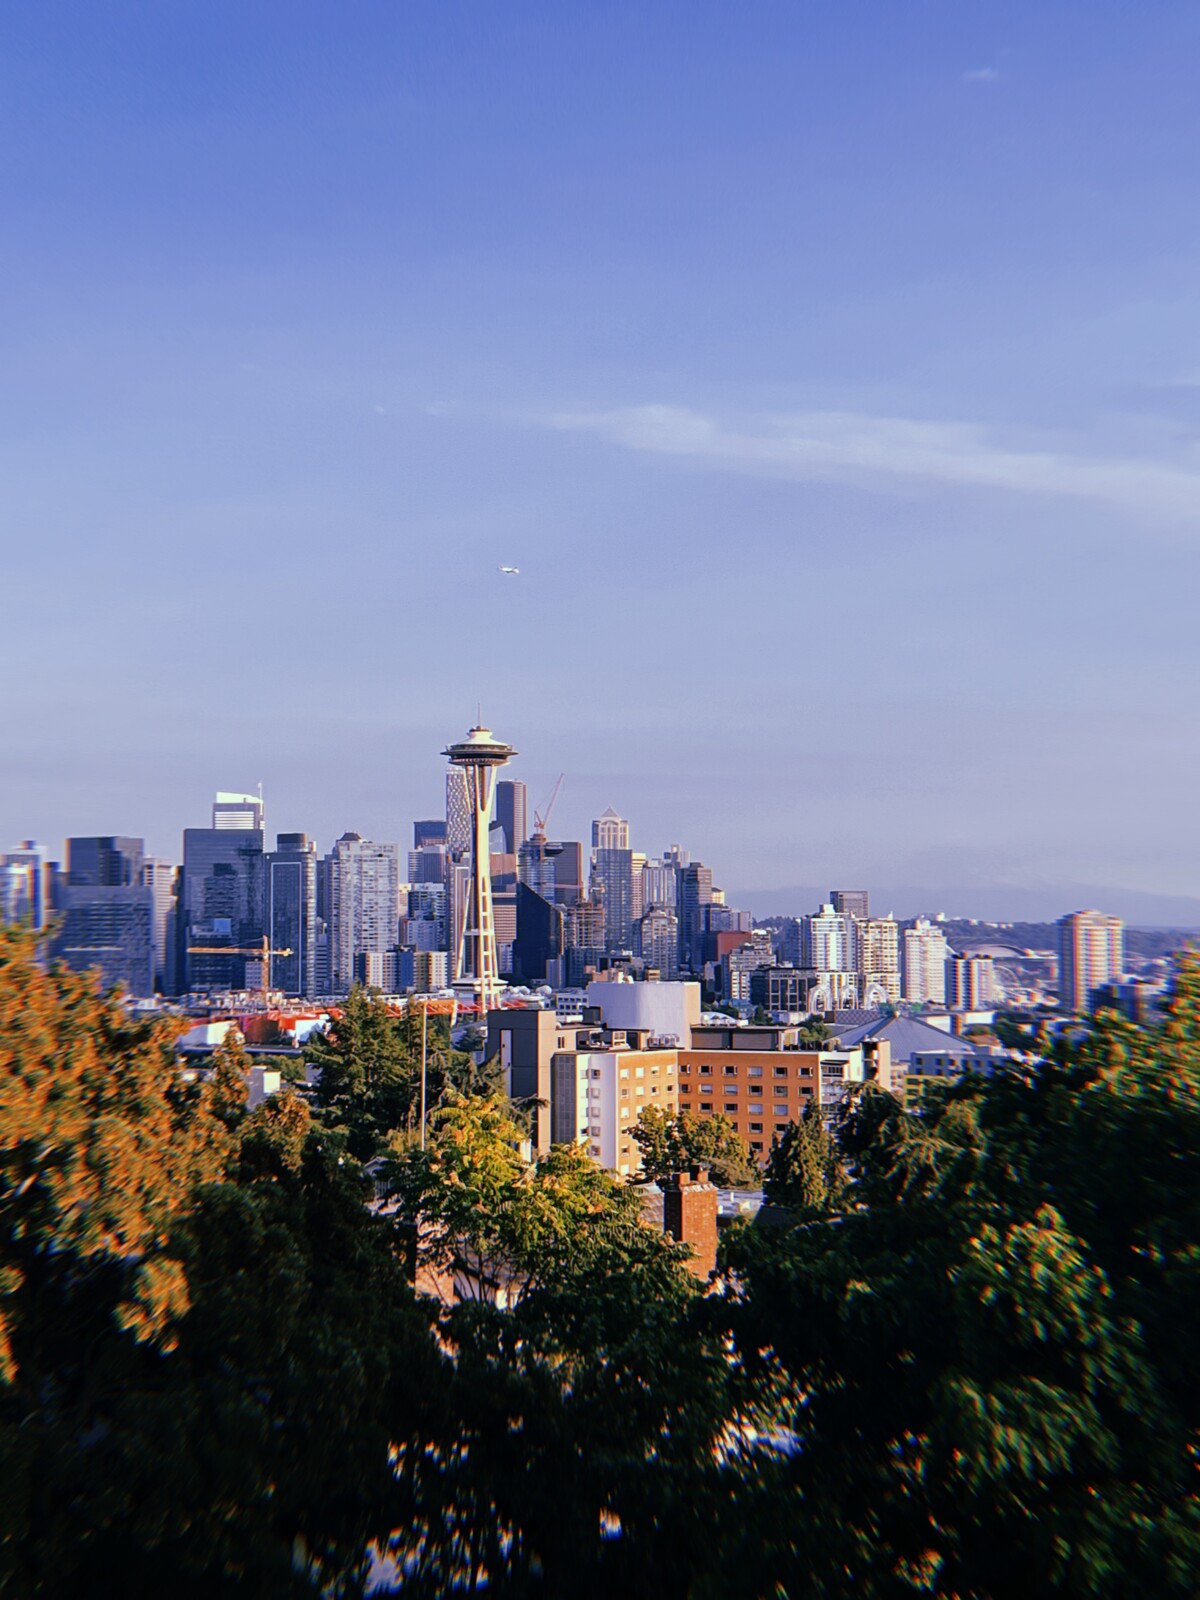 Skyline of Seattle from Kerry Park